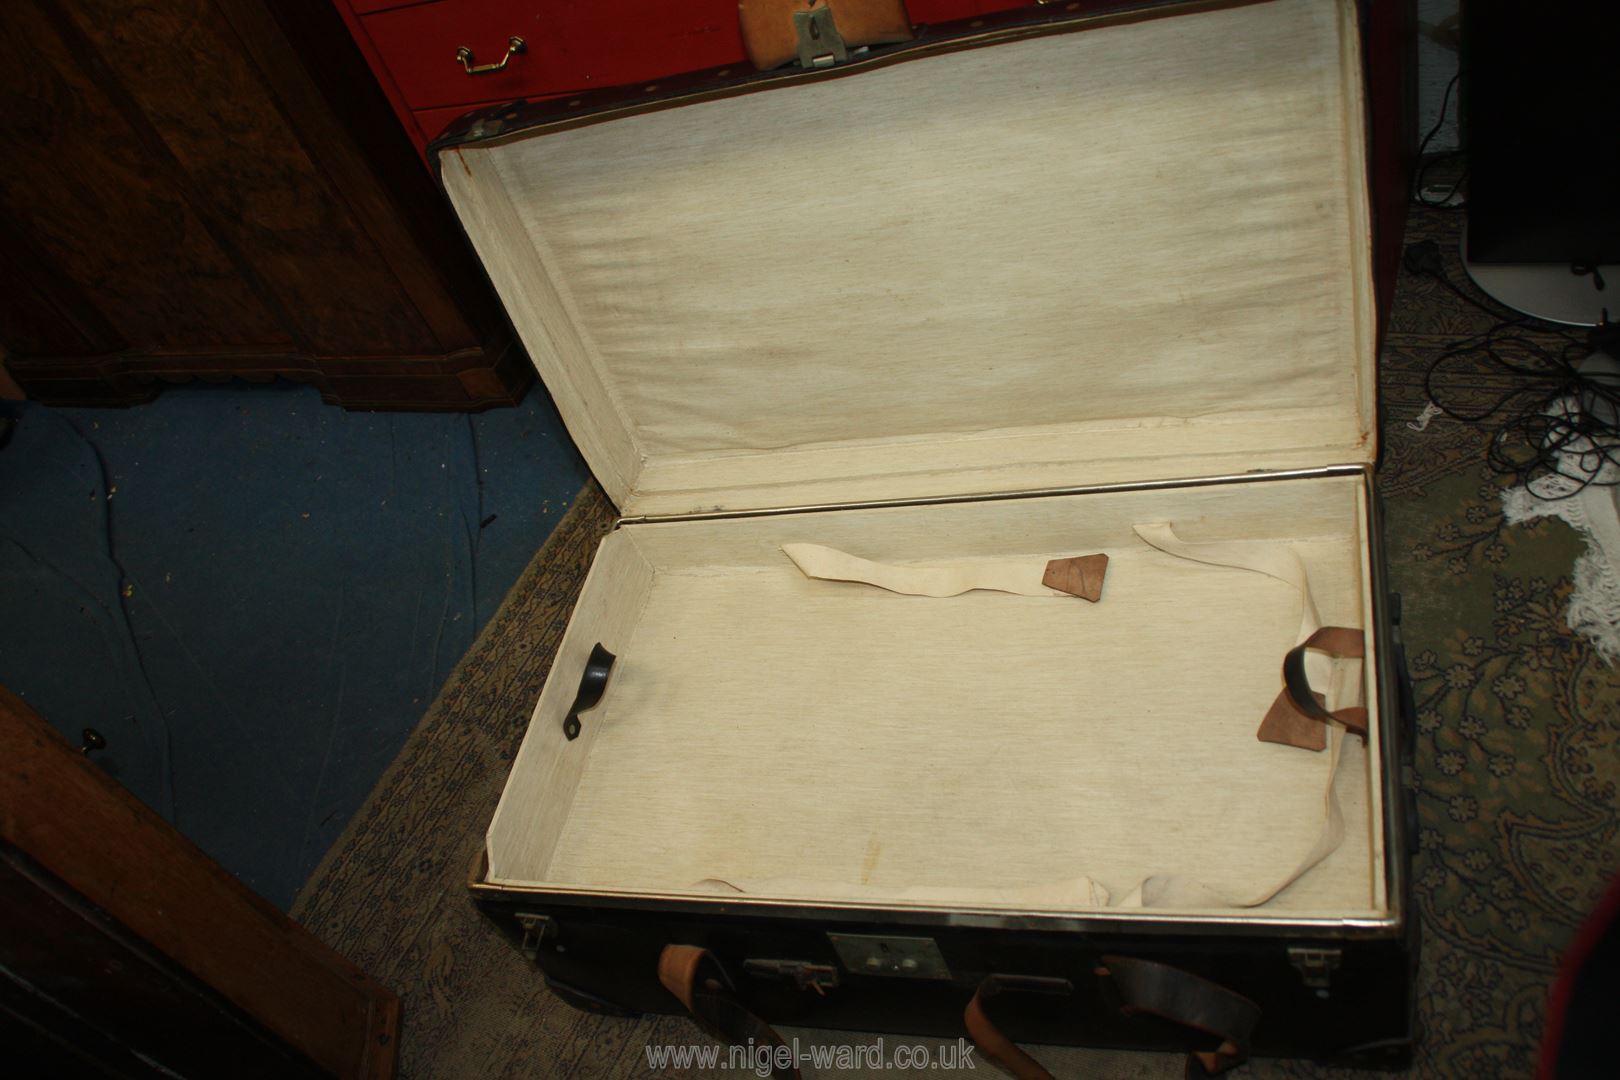 A large black leather Travel trunk with studs and straps having shelf inside (handle missing), - Image 3 of 3